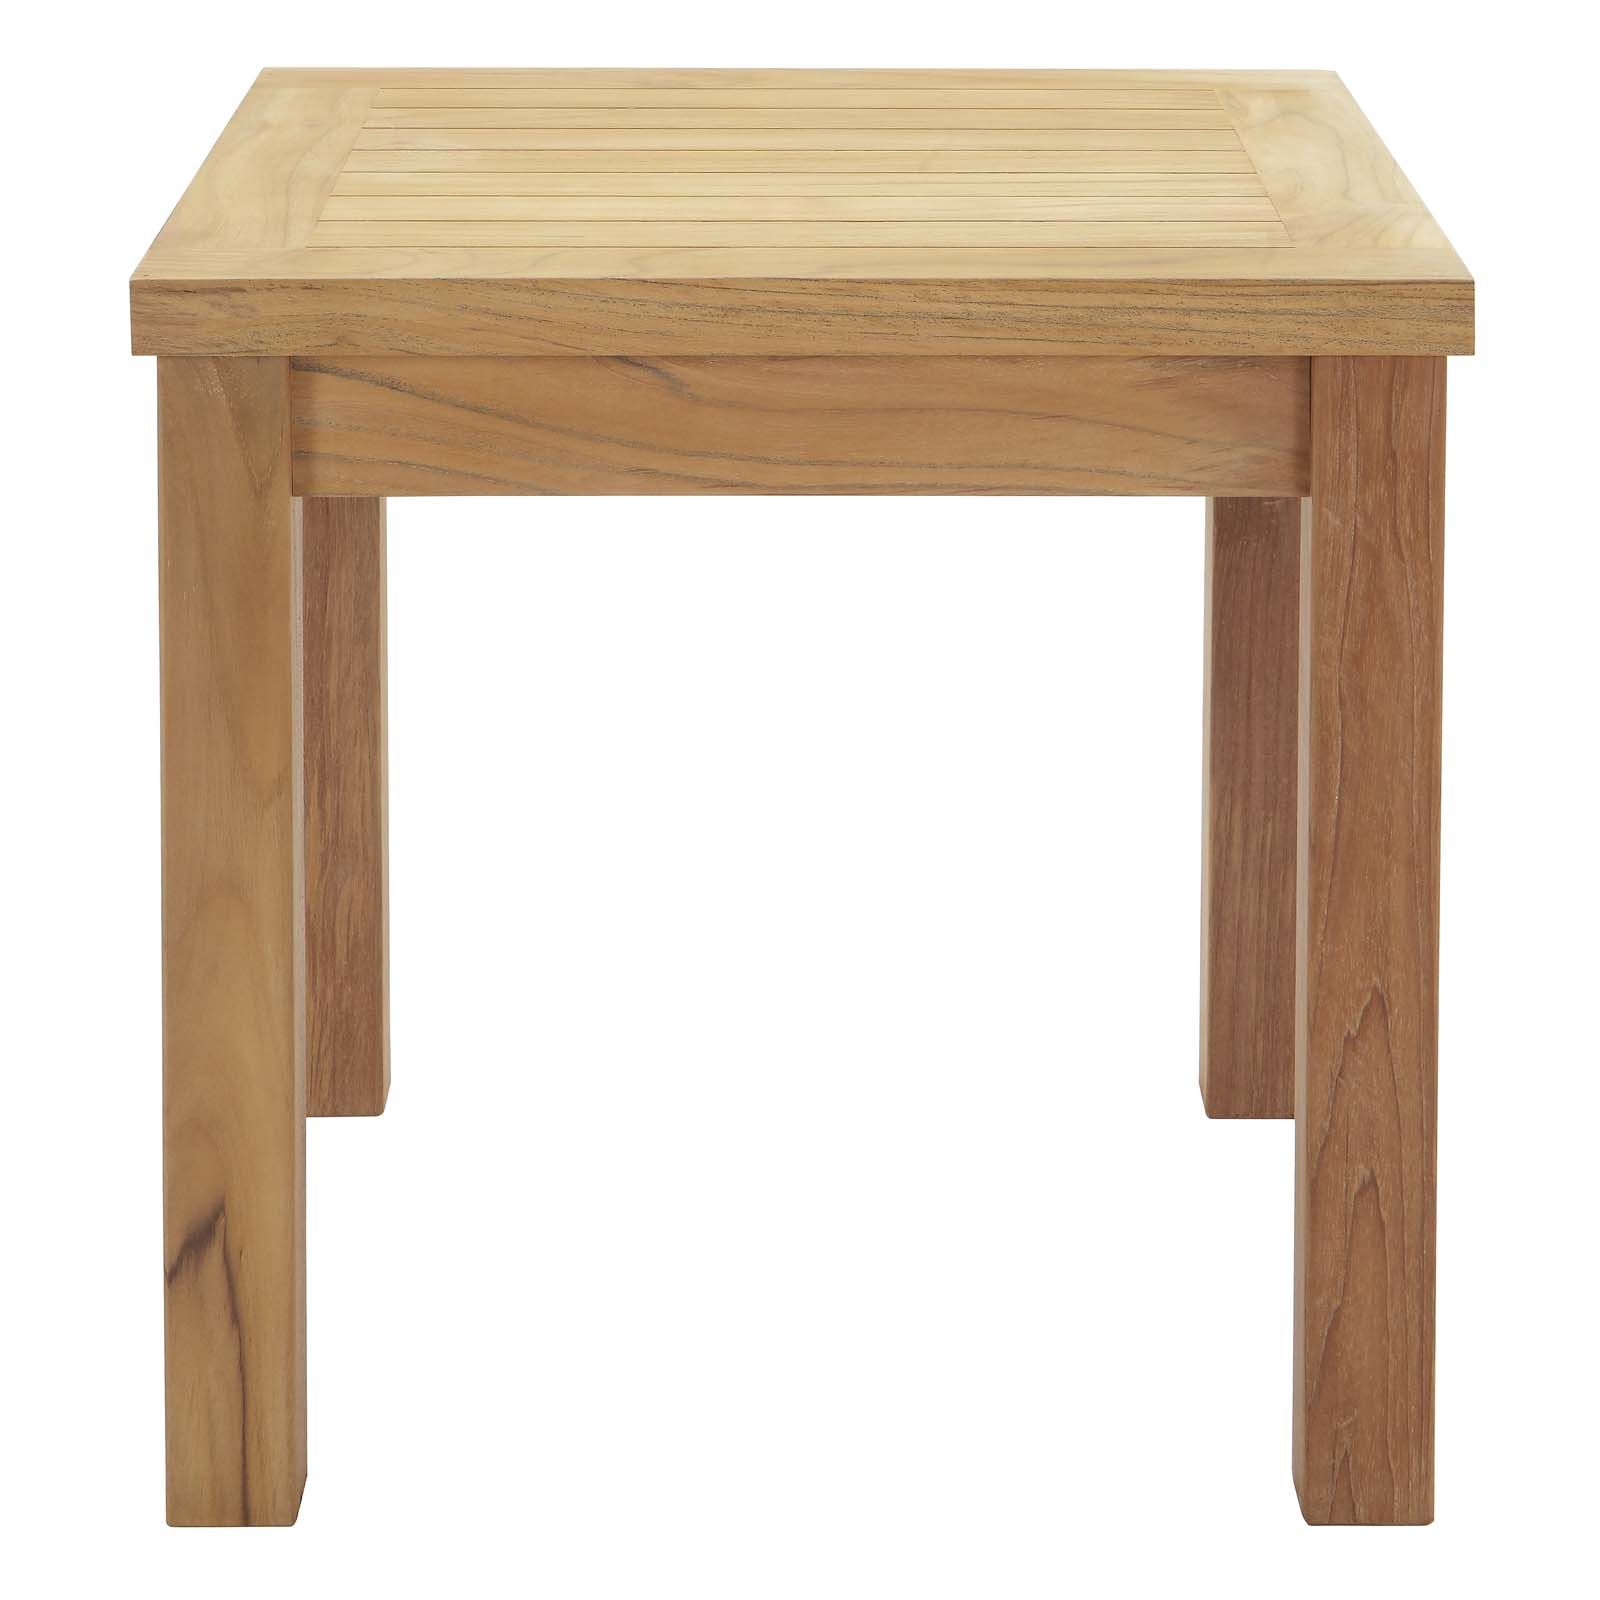 Marina Outdoor Patio Teak Side Table Natural Throughout Best And Newest Natural Wood Outdoor Side Tables (View 4 of 15)